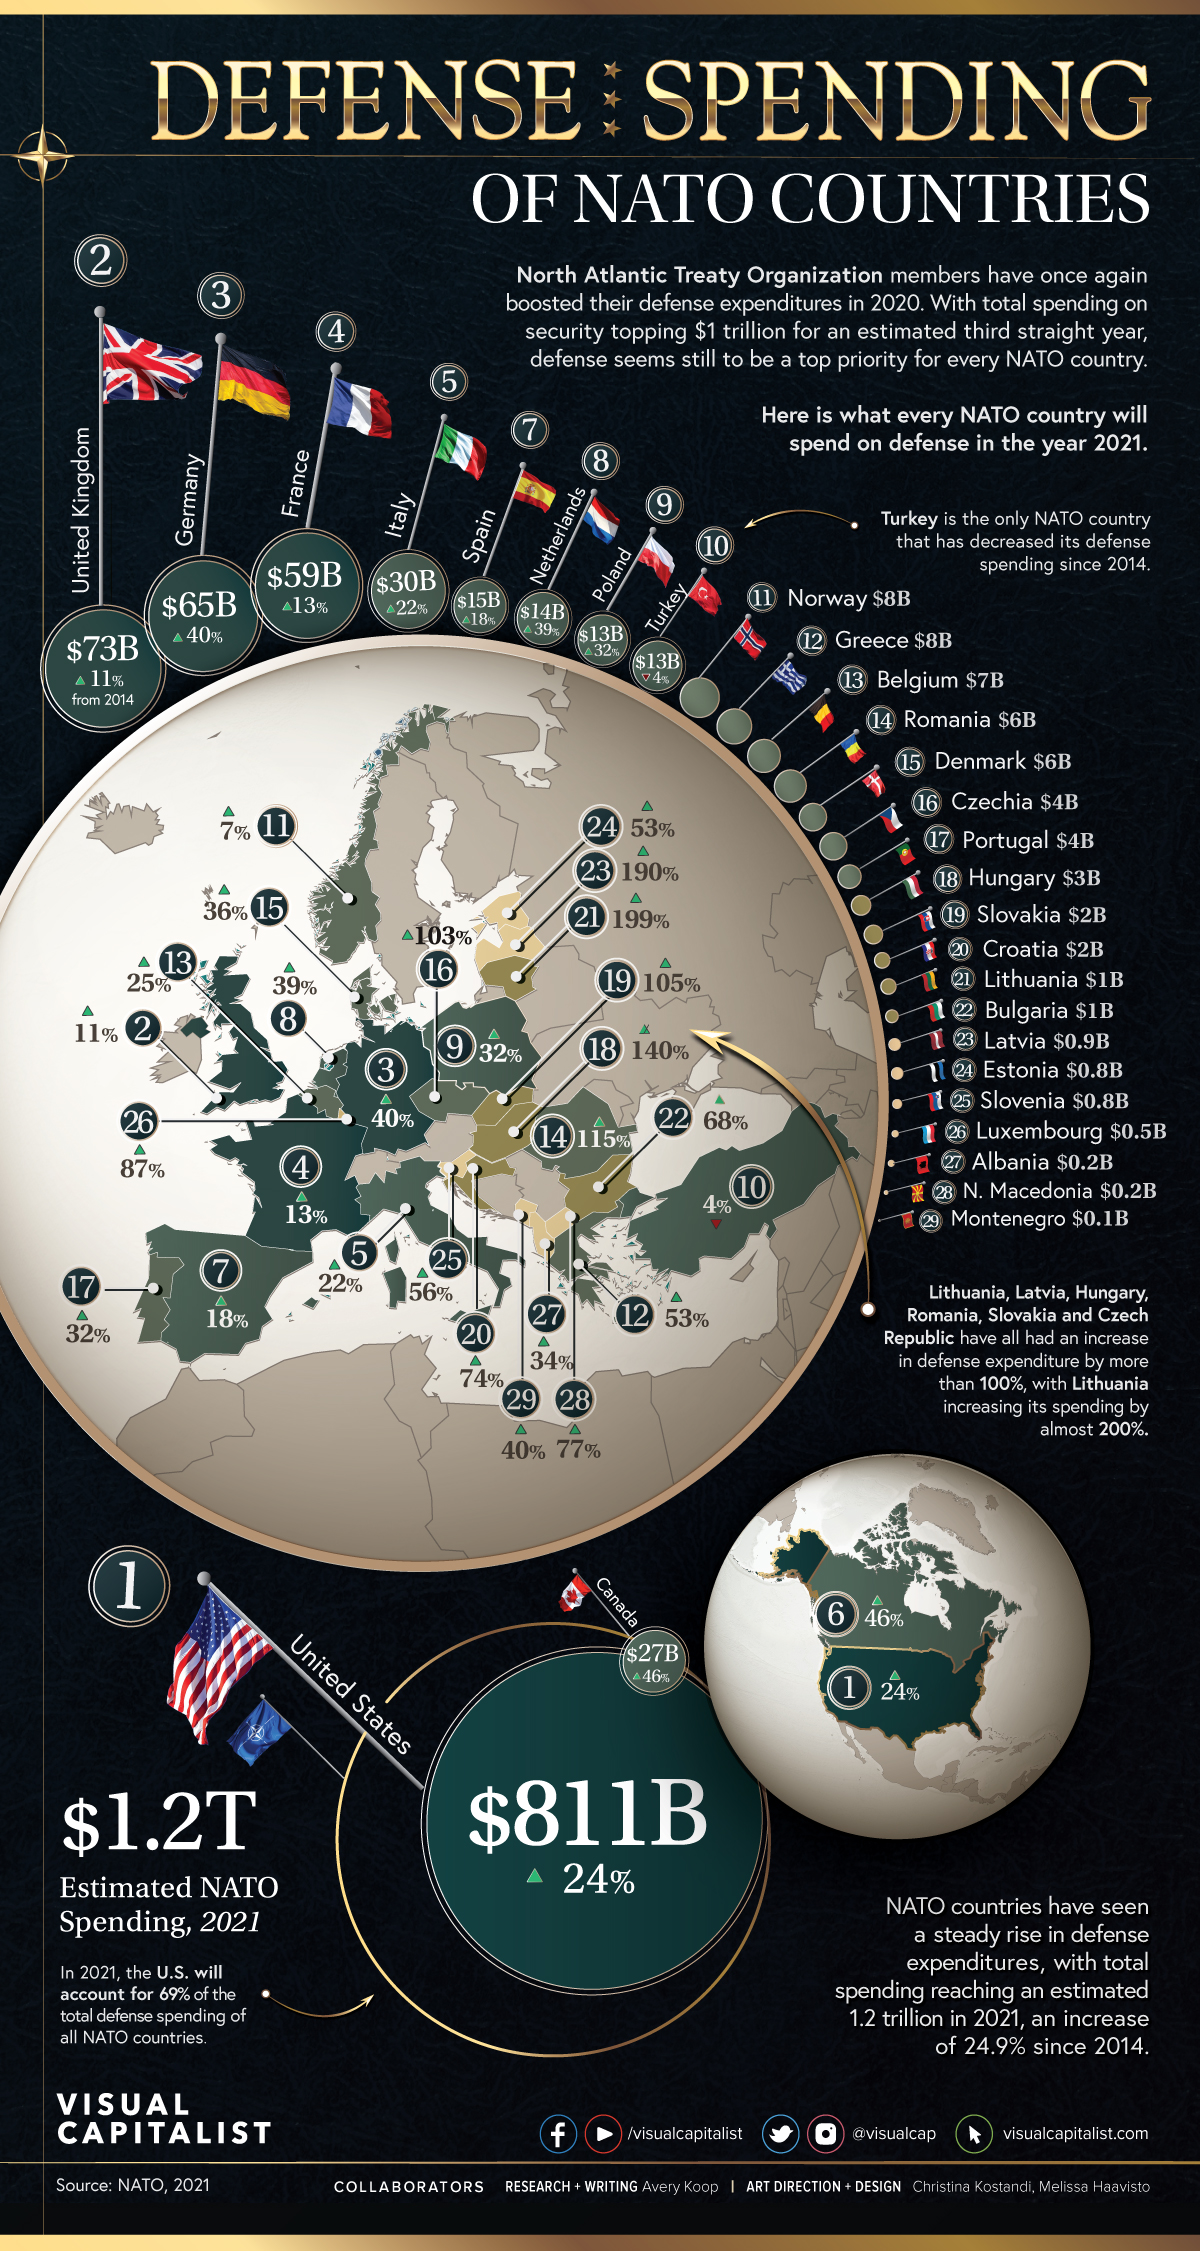 NATO Defense Spending How Much Does Each Country Contribute?